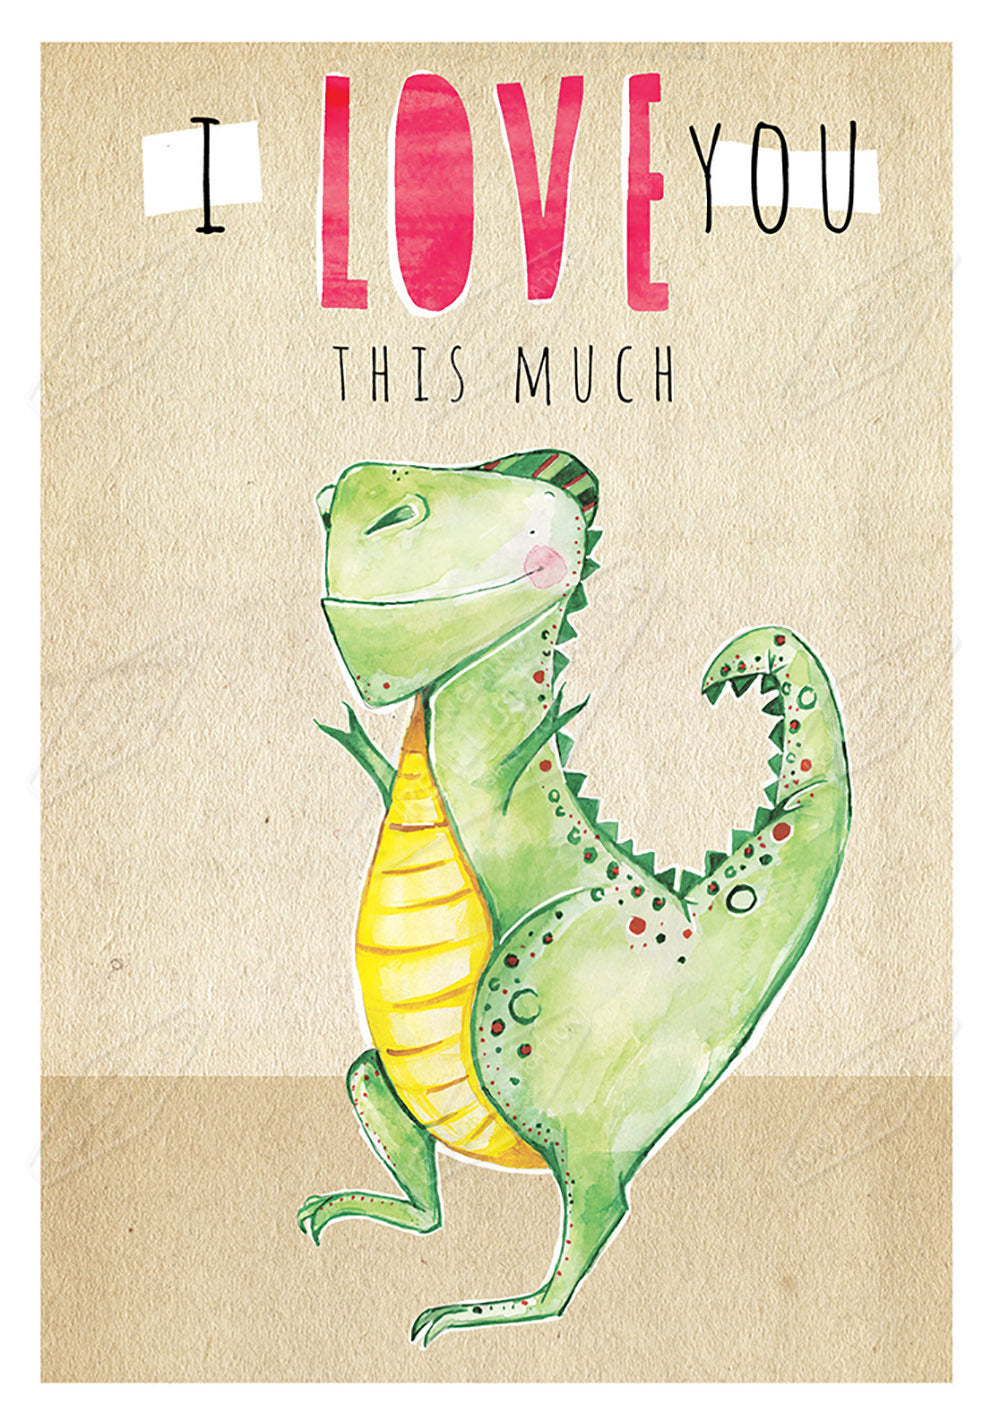 00024846EST- Emily Stalley is represented by Pure Art Licensing Agency - Valentine's Greeting Card Design